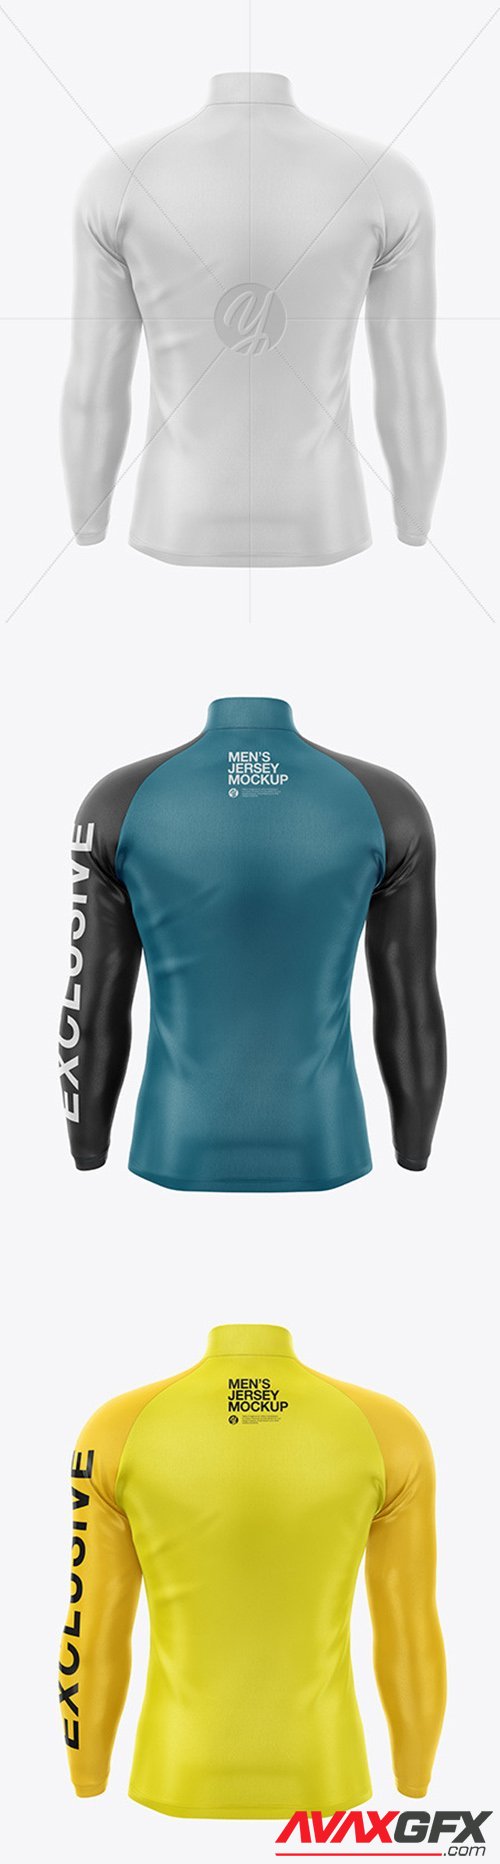 Mens Jersey With Long Sleeve Mockup - Back View 49454 TIF